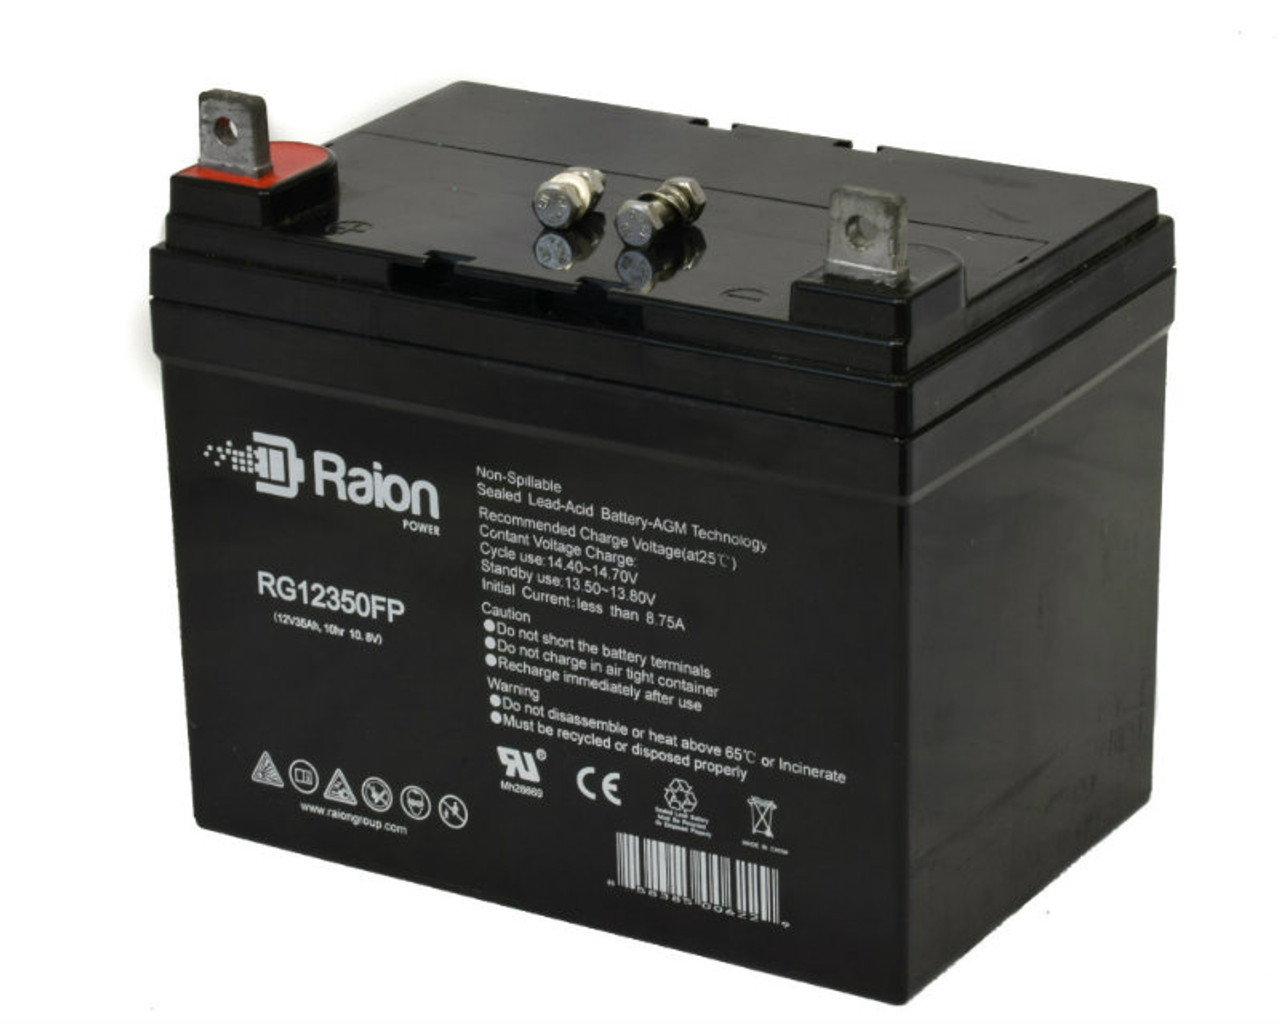 Raion Power Replacement 12V 35Ah Battery for Noma GT18HP 43" - 1 Pack